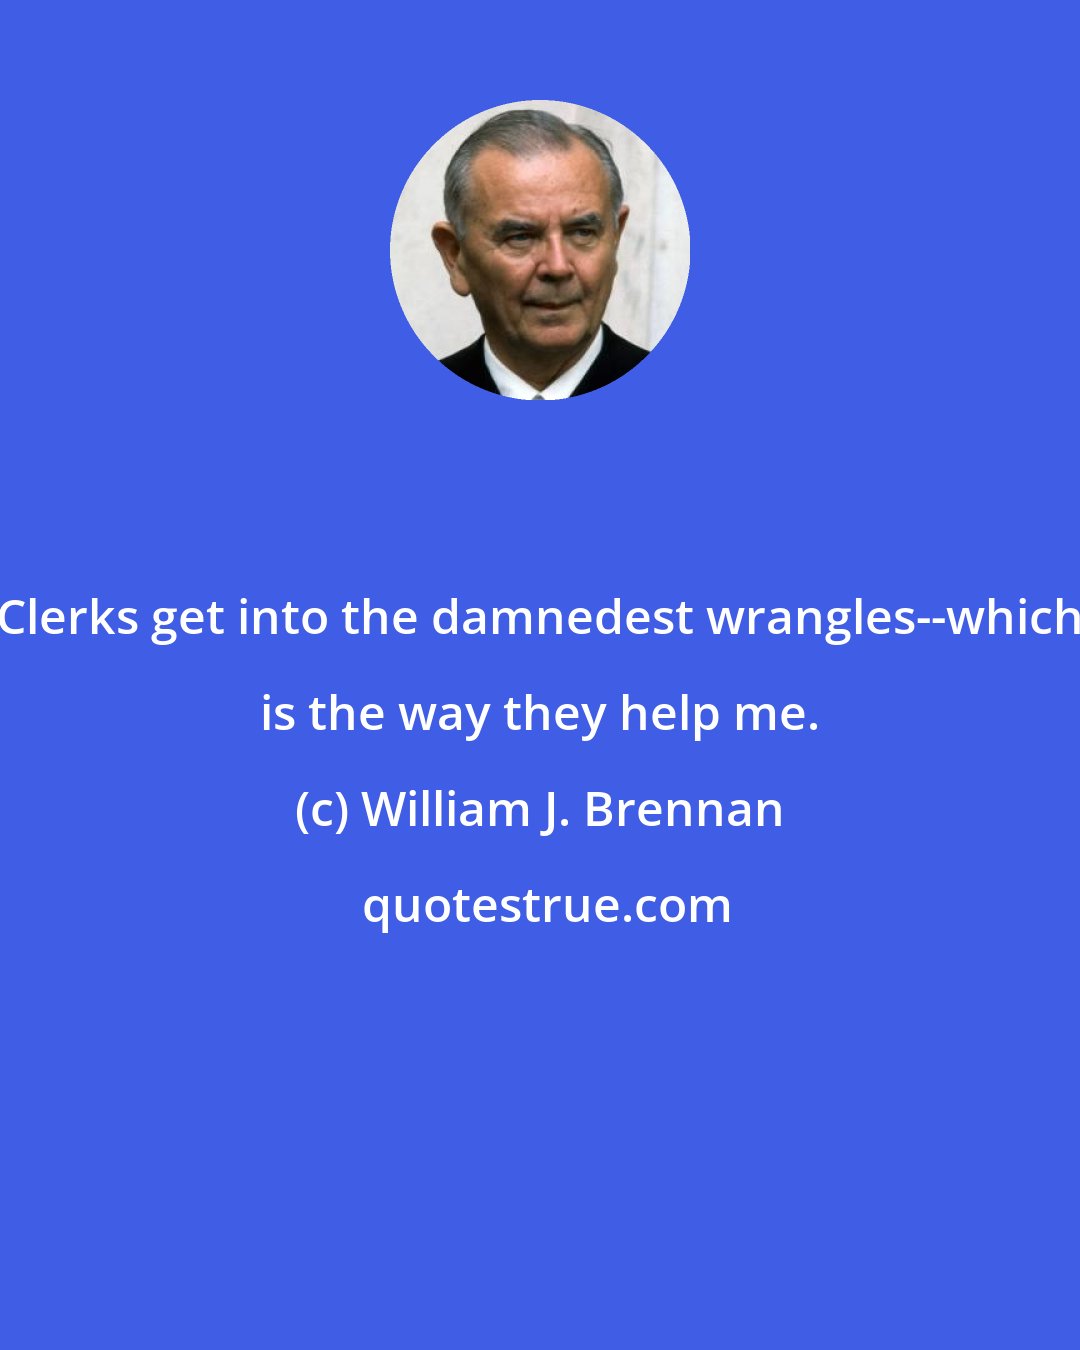 William J. Brennan: Clerks get into the damnedest wrangles--which is the way they help me.